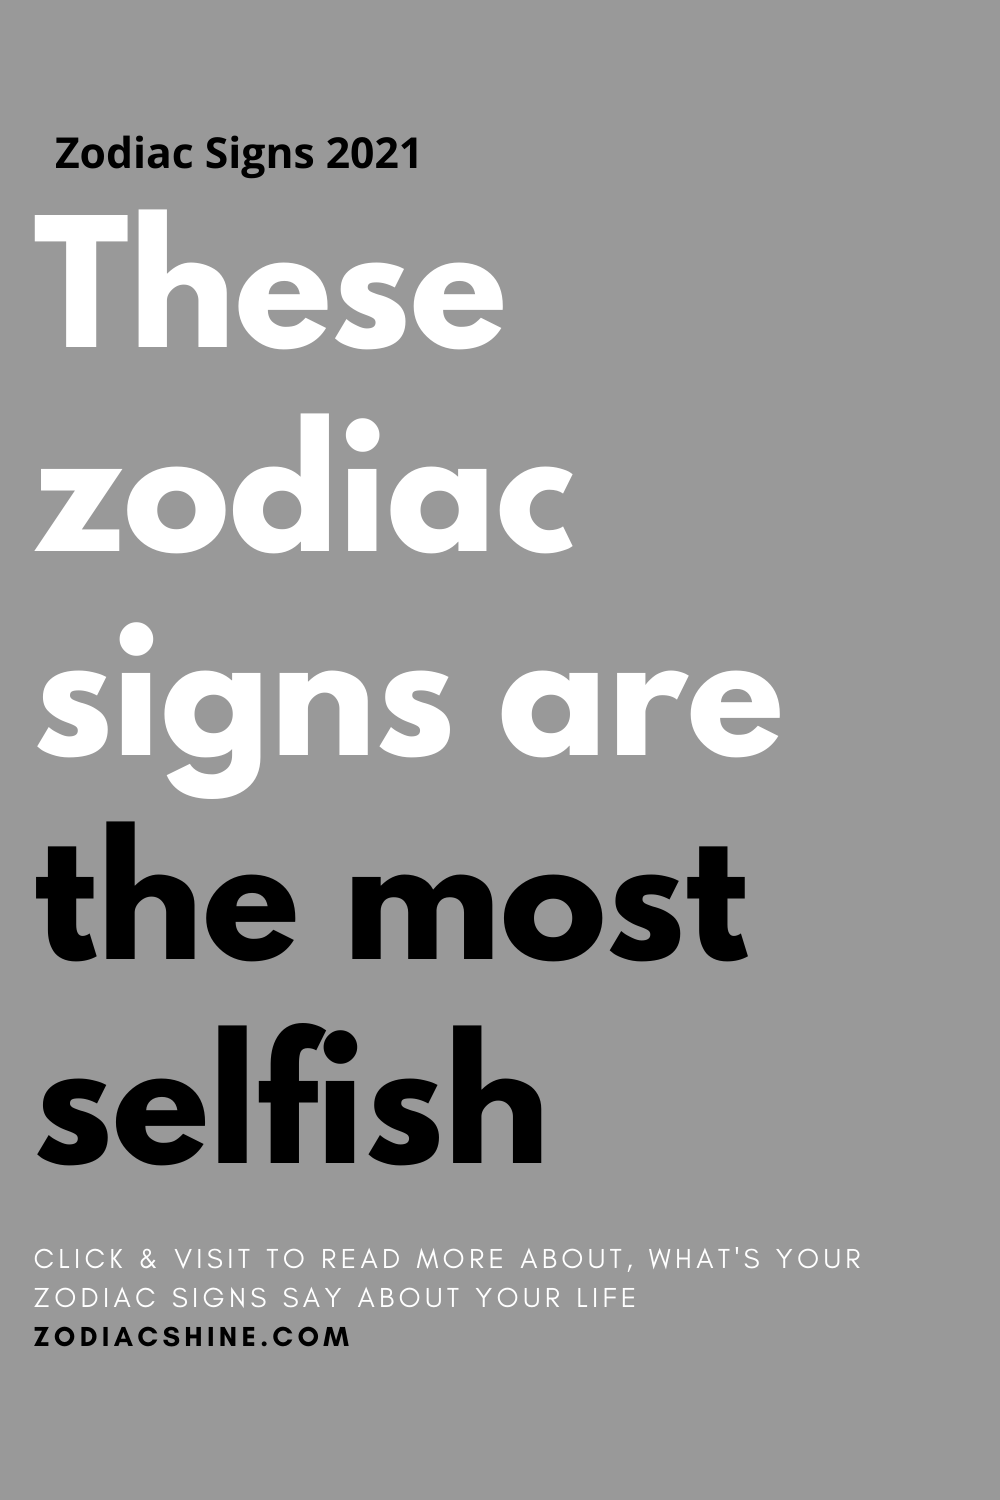 These zodiac signs are the most selfish